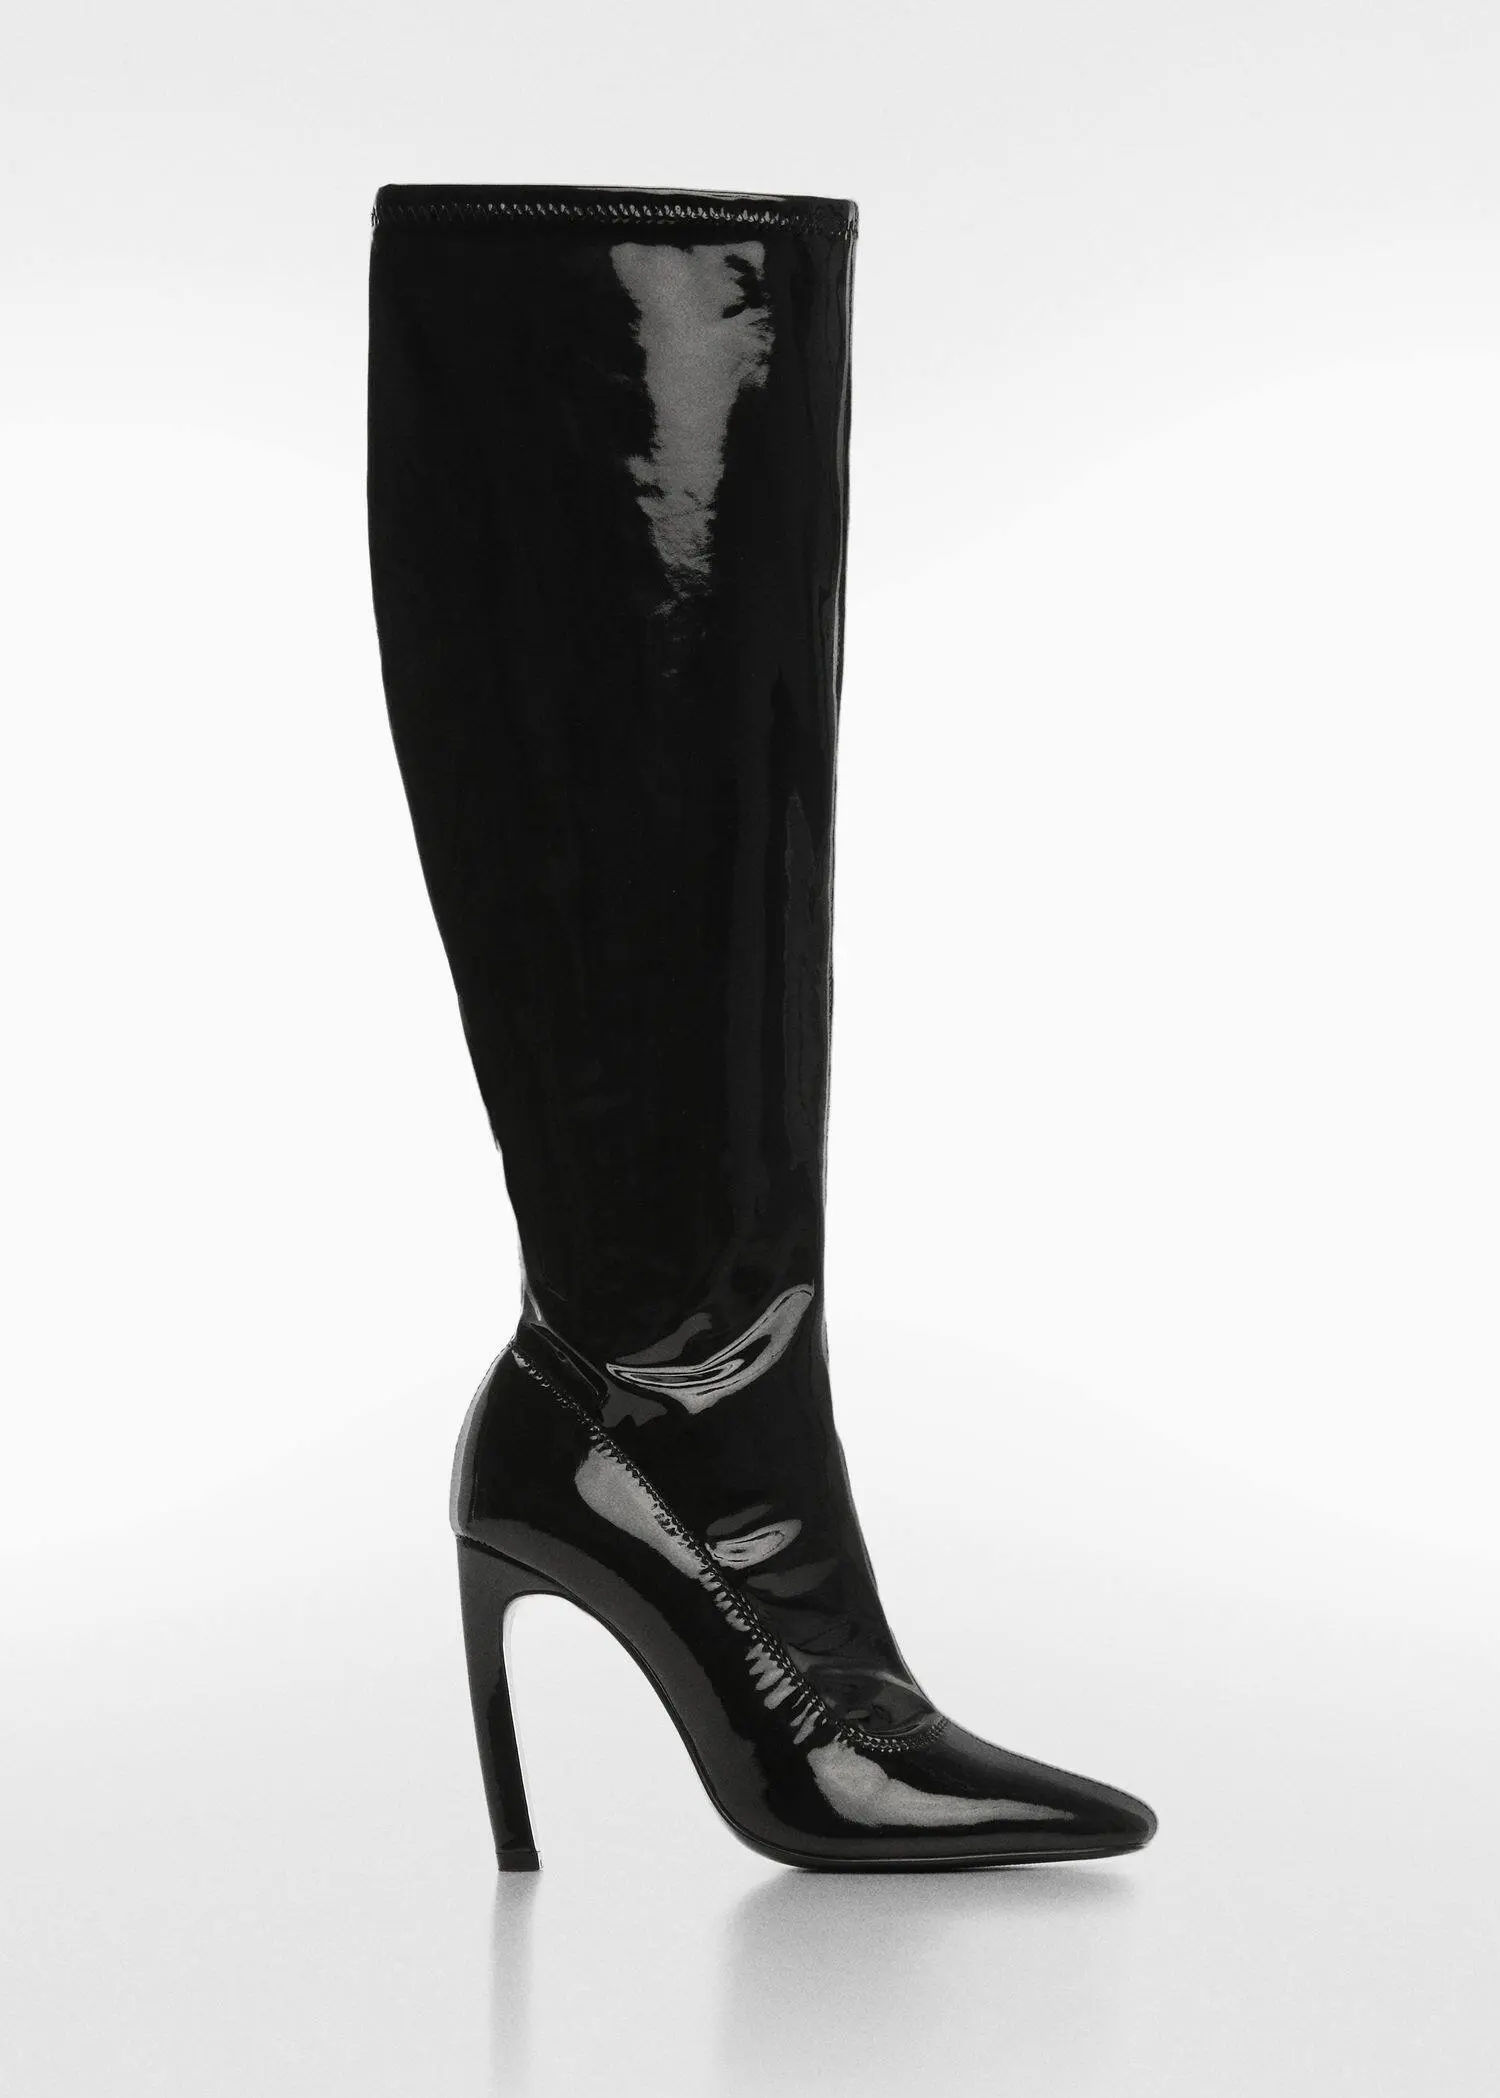 Mango Patent leather-effect heeled boots. 2